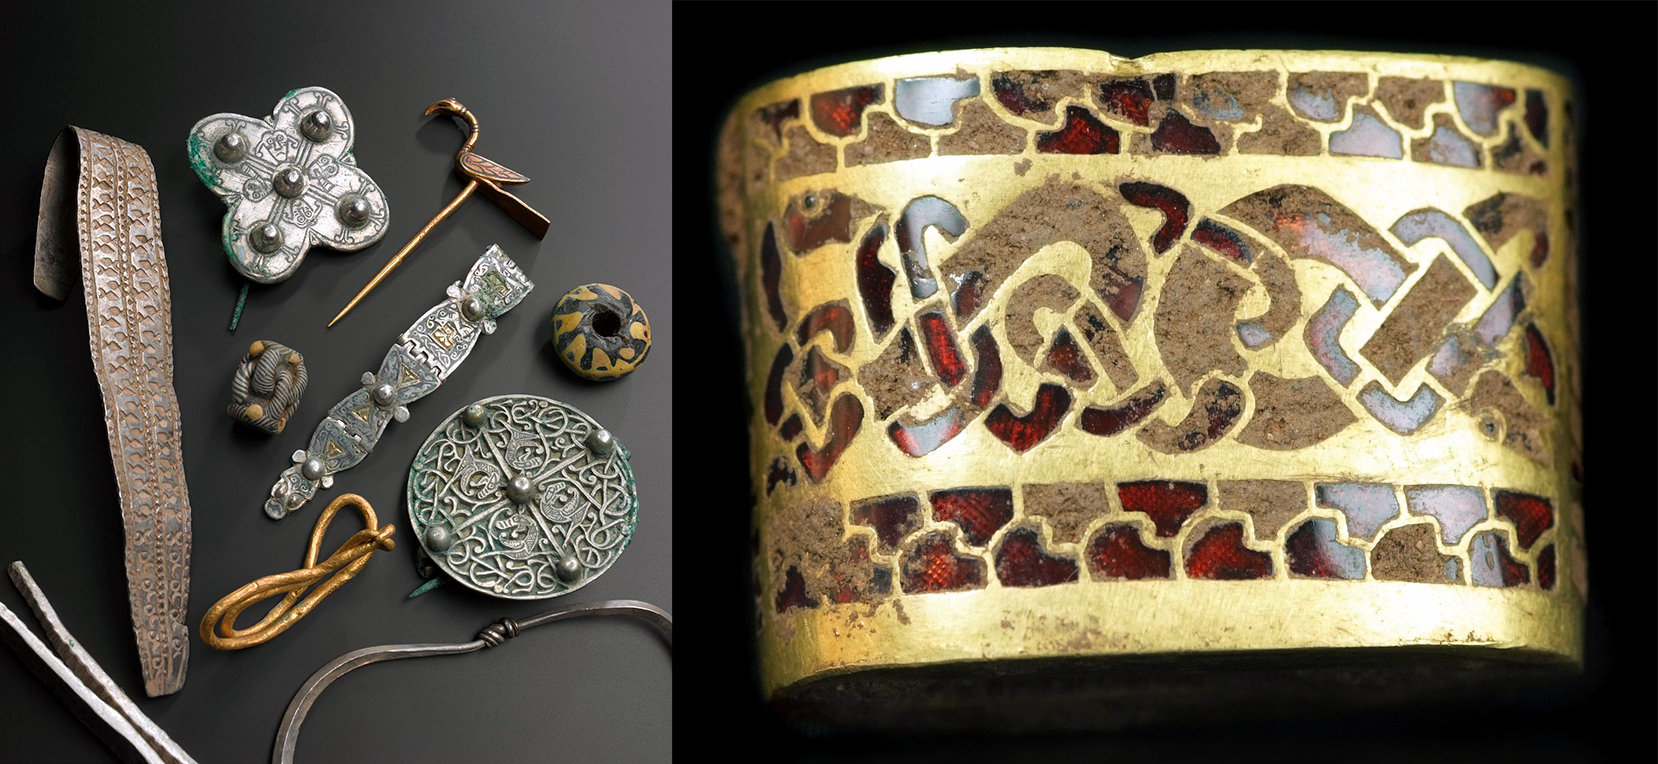 Left: Small selection of objects from the Viking-age Galloway Hoard, which includes more than 100 objects made in gold, silver, crystal, glass, stone, and earthen objects, discovered in the historical county of Kirkcudbrightshire in Dumfries and Galloway, Scotland in 2014 (National Museum of Scotland, CC BY-SA 4.0); right: Cuff from the Staffordshire Hoard, which includes more than 4,500 items a and metal fragments, found near the village of Hammerwich, near Lichfield, in Staffordshire, England in 2009 Birmingham Museum and Art Gallery, photo: Daniel Buxton, CC BY 2.0)